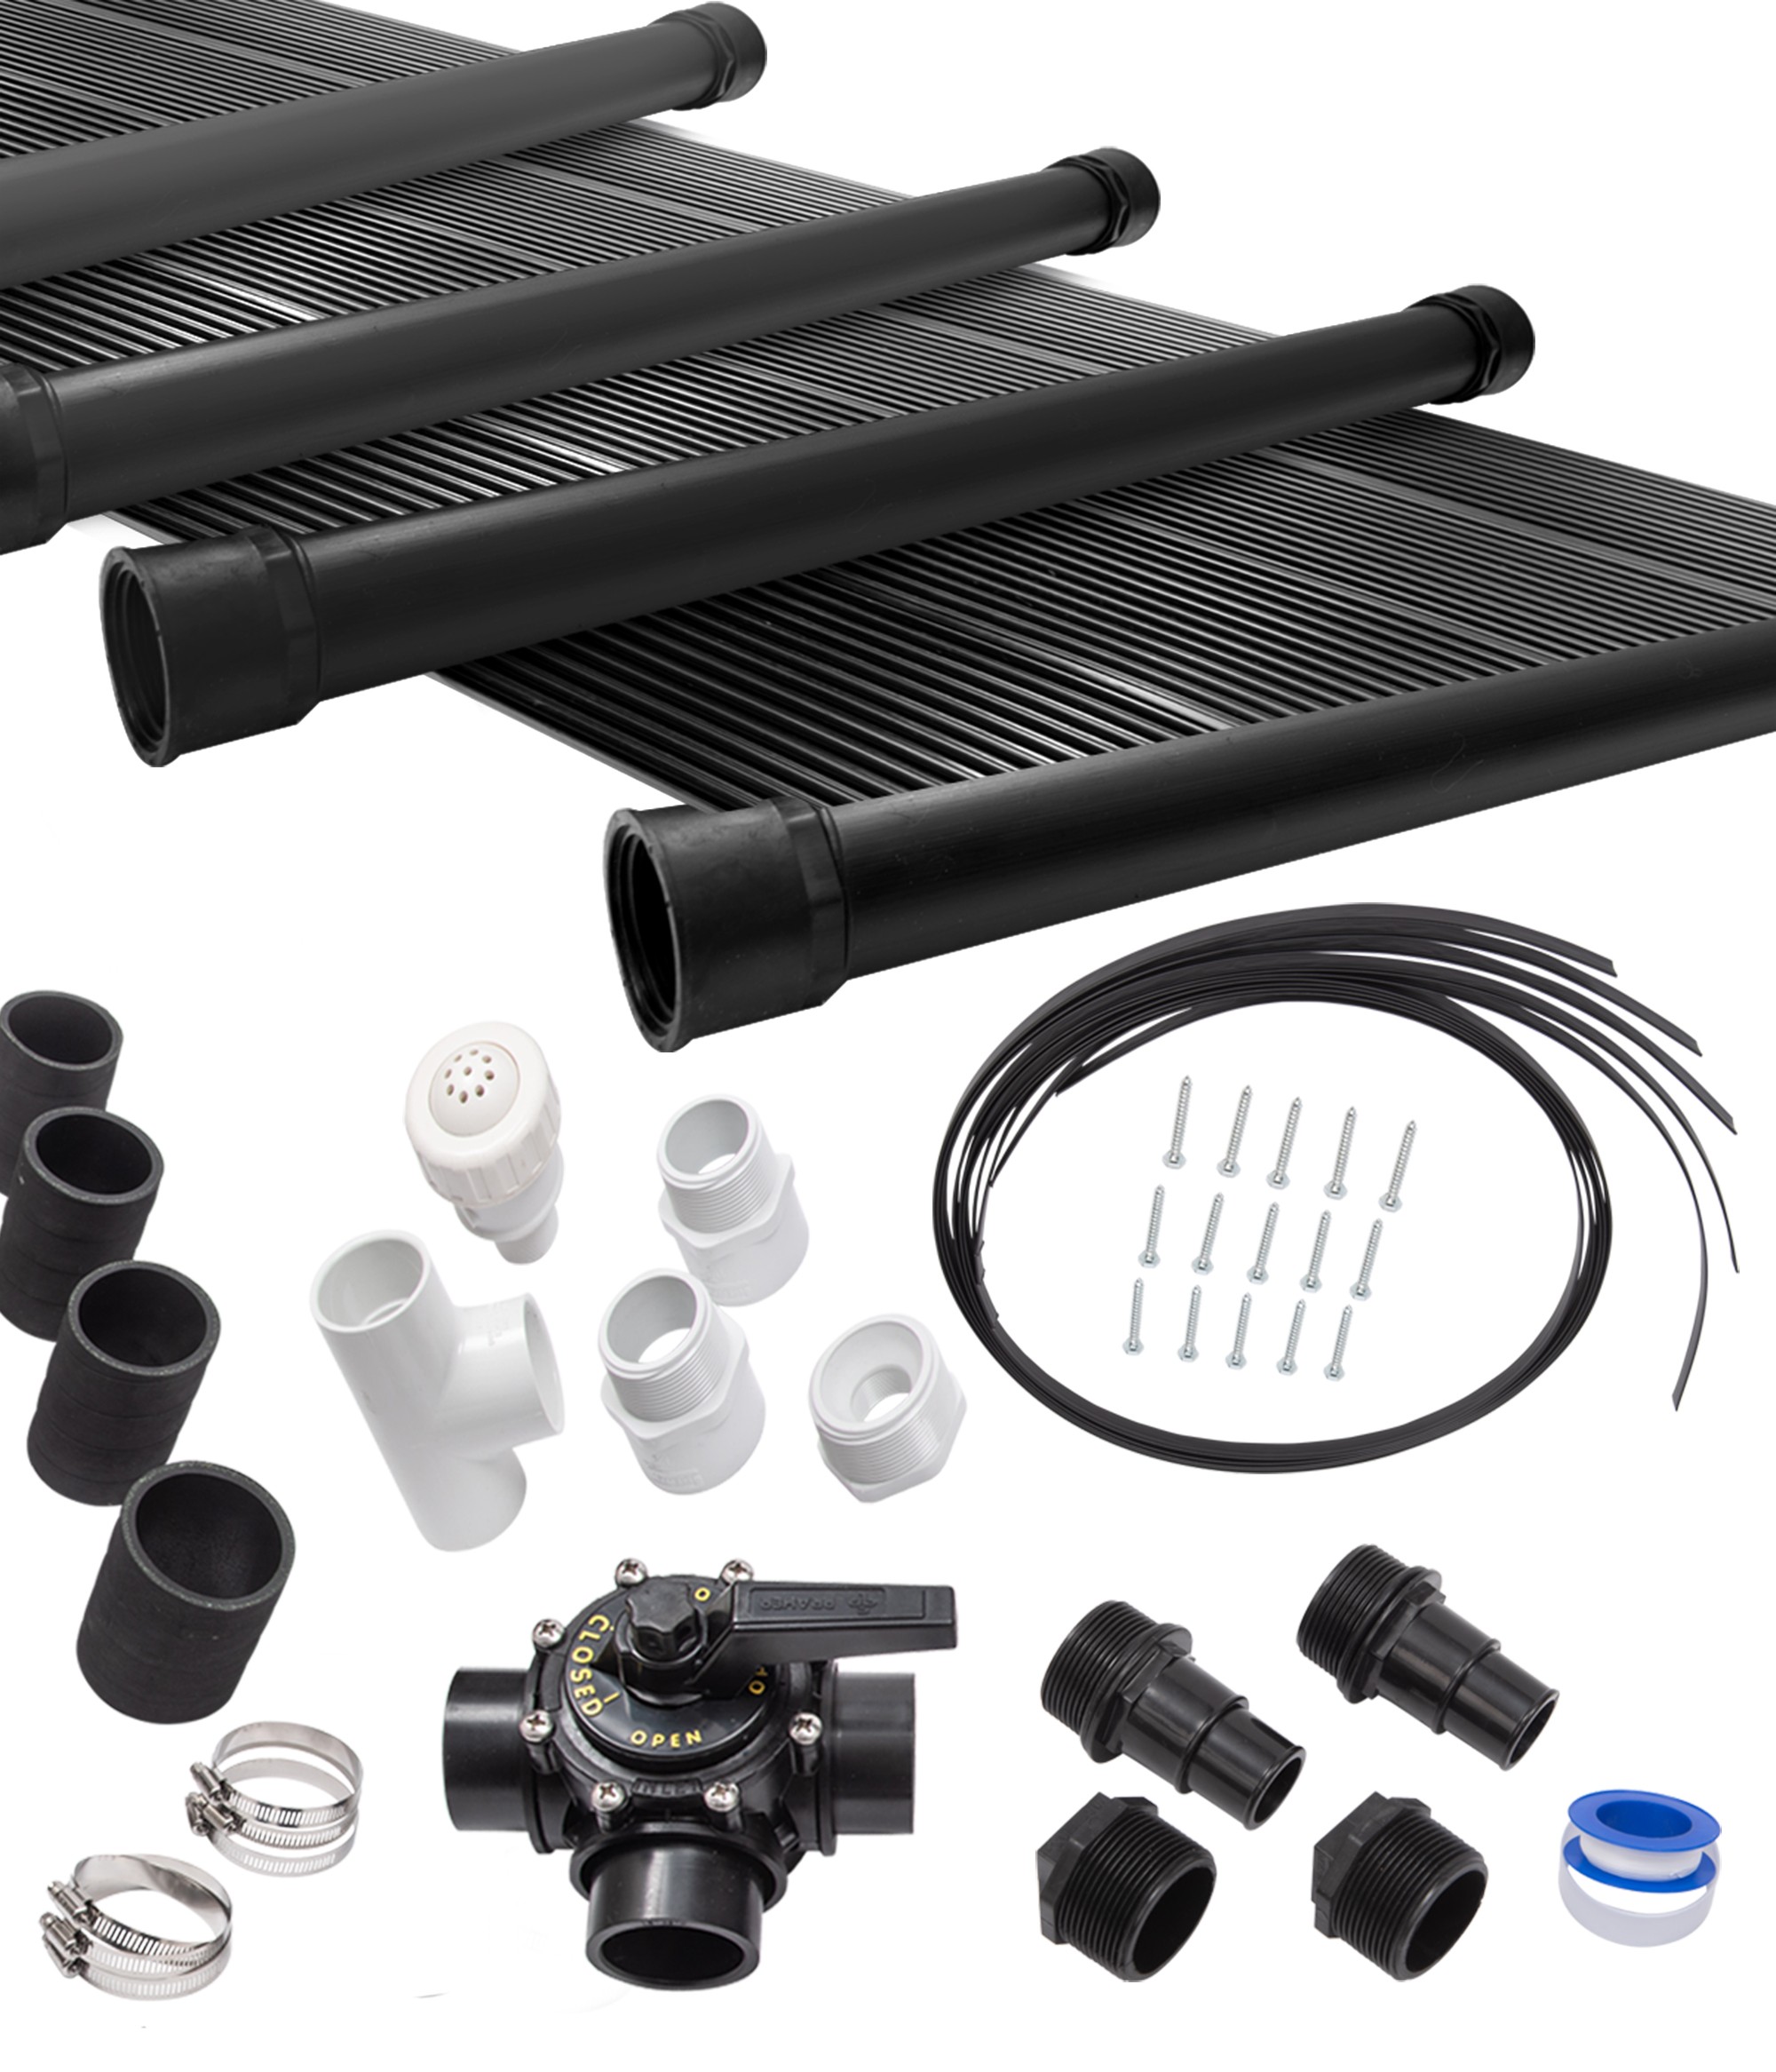 12-2X10' SunQuest Solar Swimming Pool Heater Complete System with Roof Kits